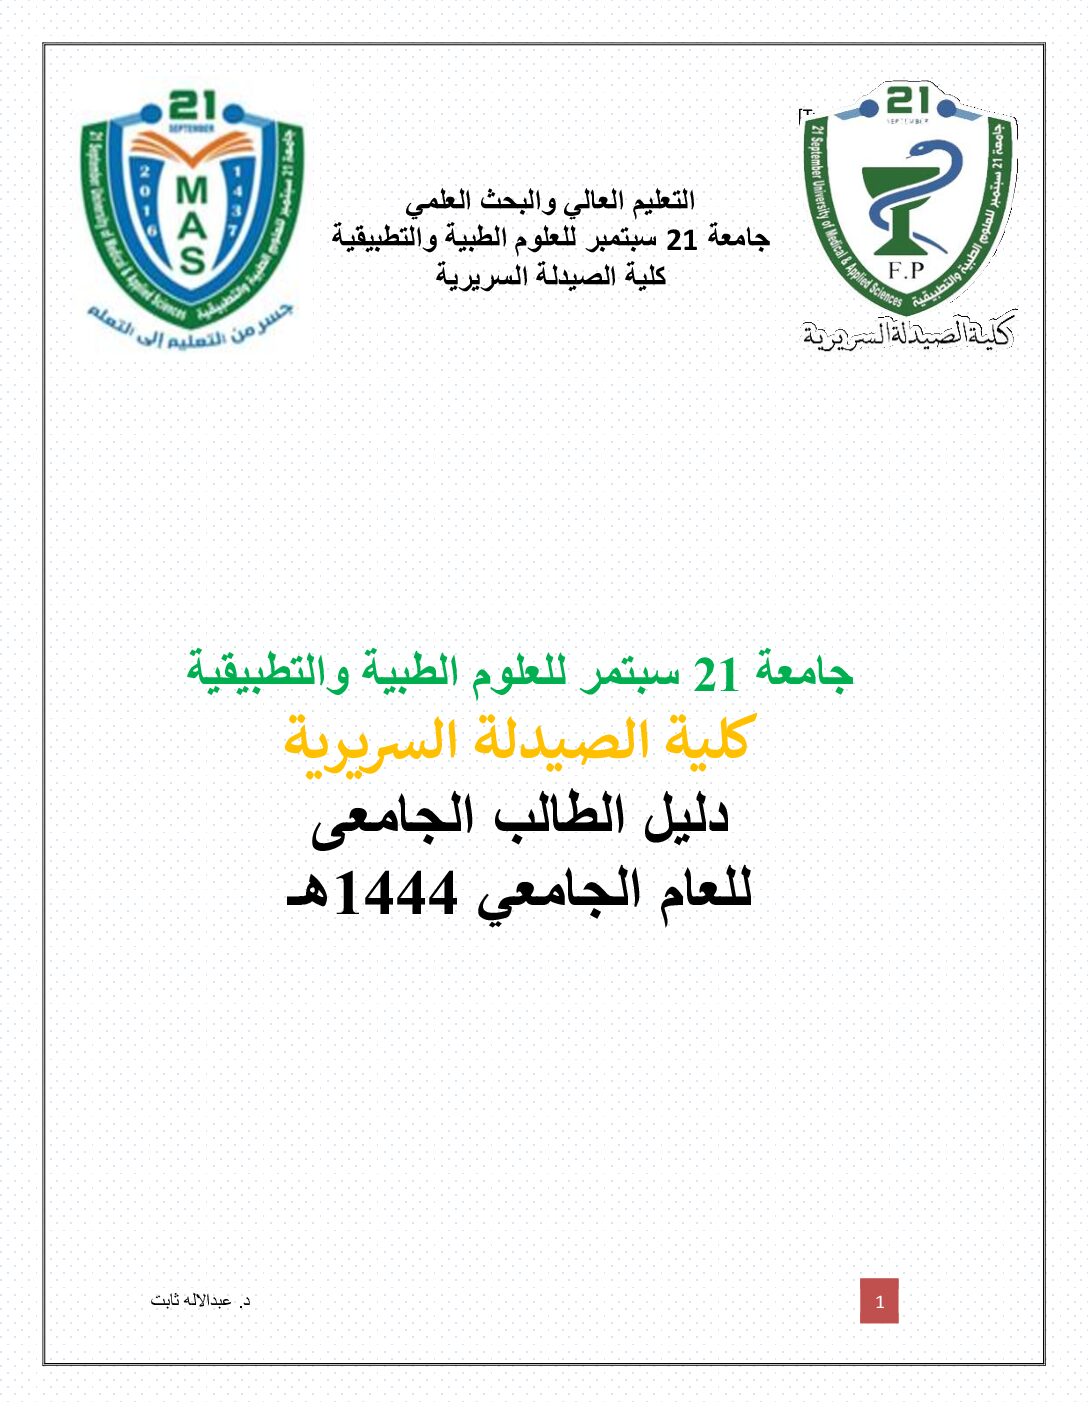 Undergraduate student guide for students of the College of Clinical Pharmacy